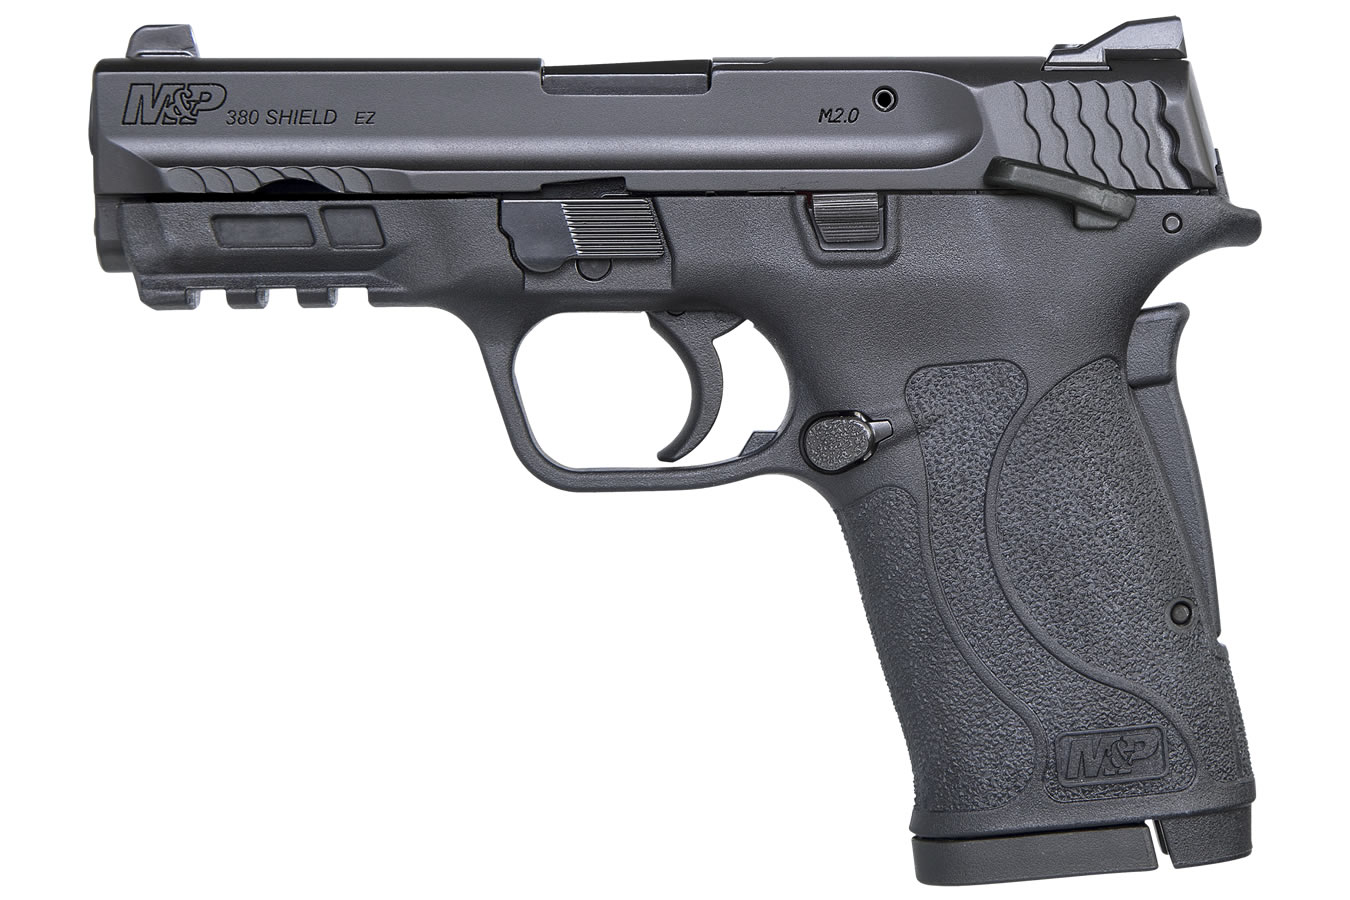 No. 4 Best Selling: SMITH AND WESSON MP380 SHIELD 380 ACP PISTOL W/ THUMB SAFETY